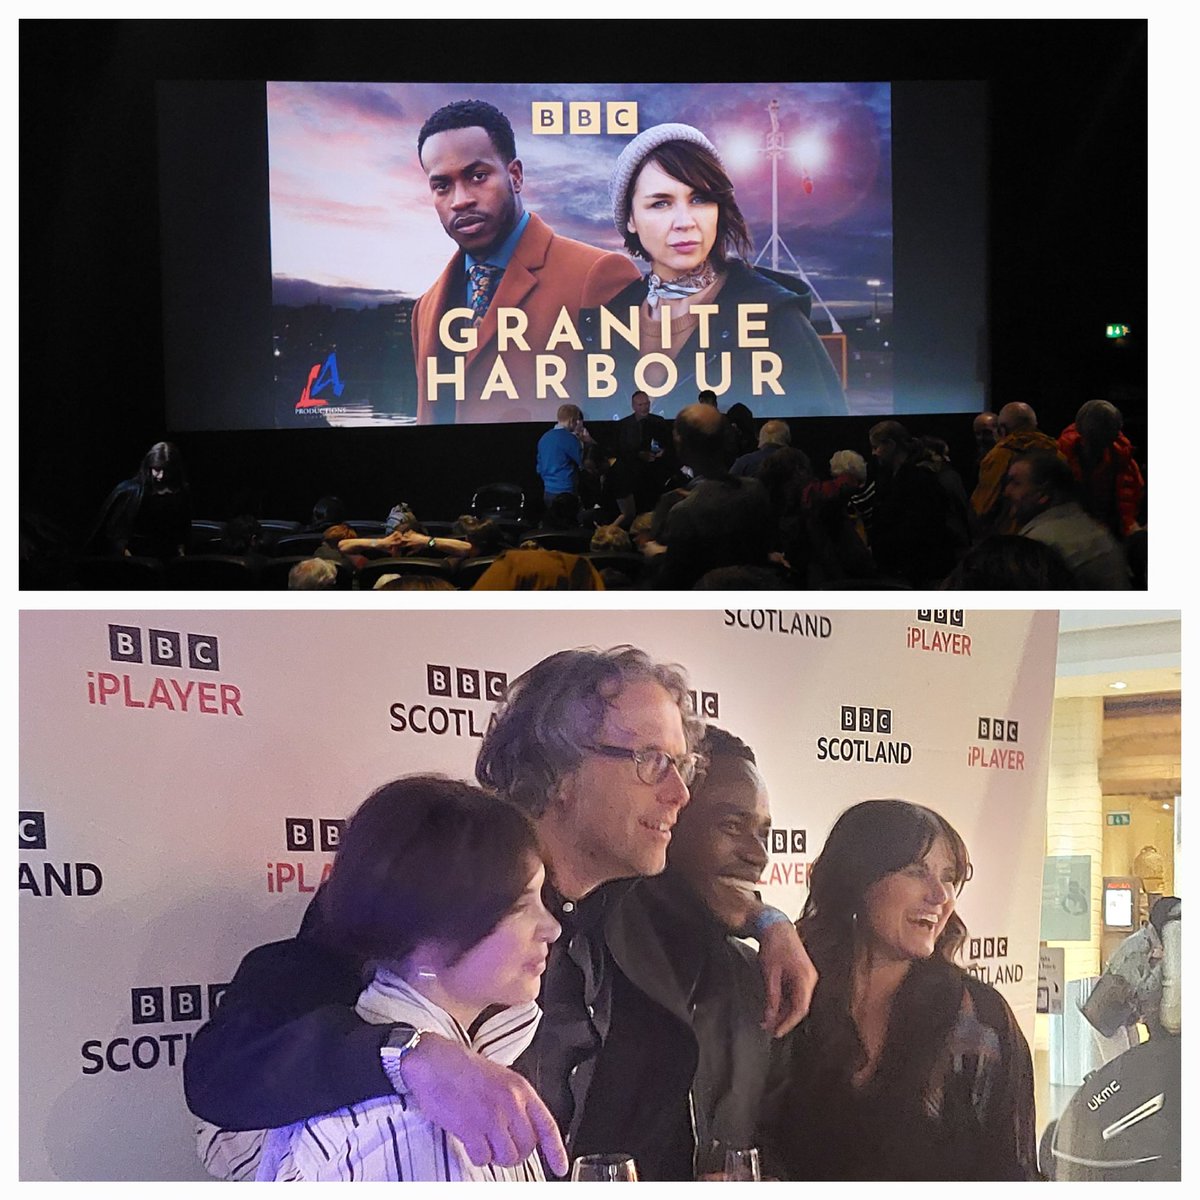 Rare evening at Ciniworld. Attended premier of BBC Granite Harbour detective  series2 along with production and cast Q&A post screening. And yes seaguls were troublesome on location shoots.